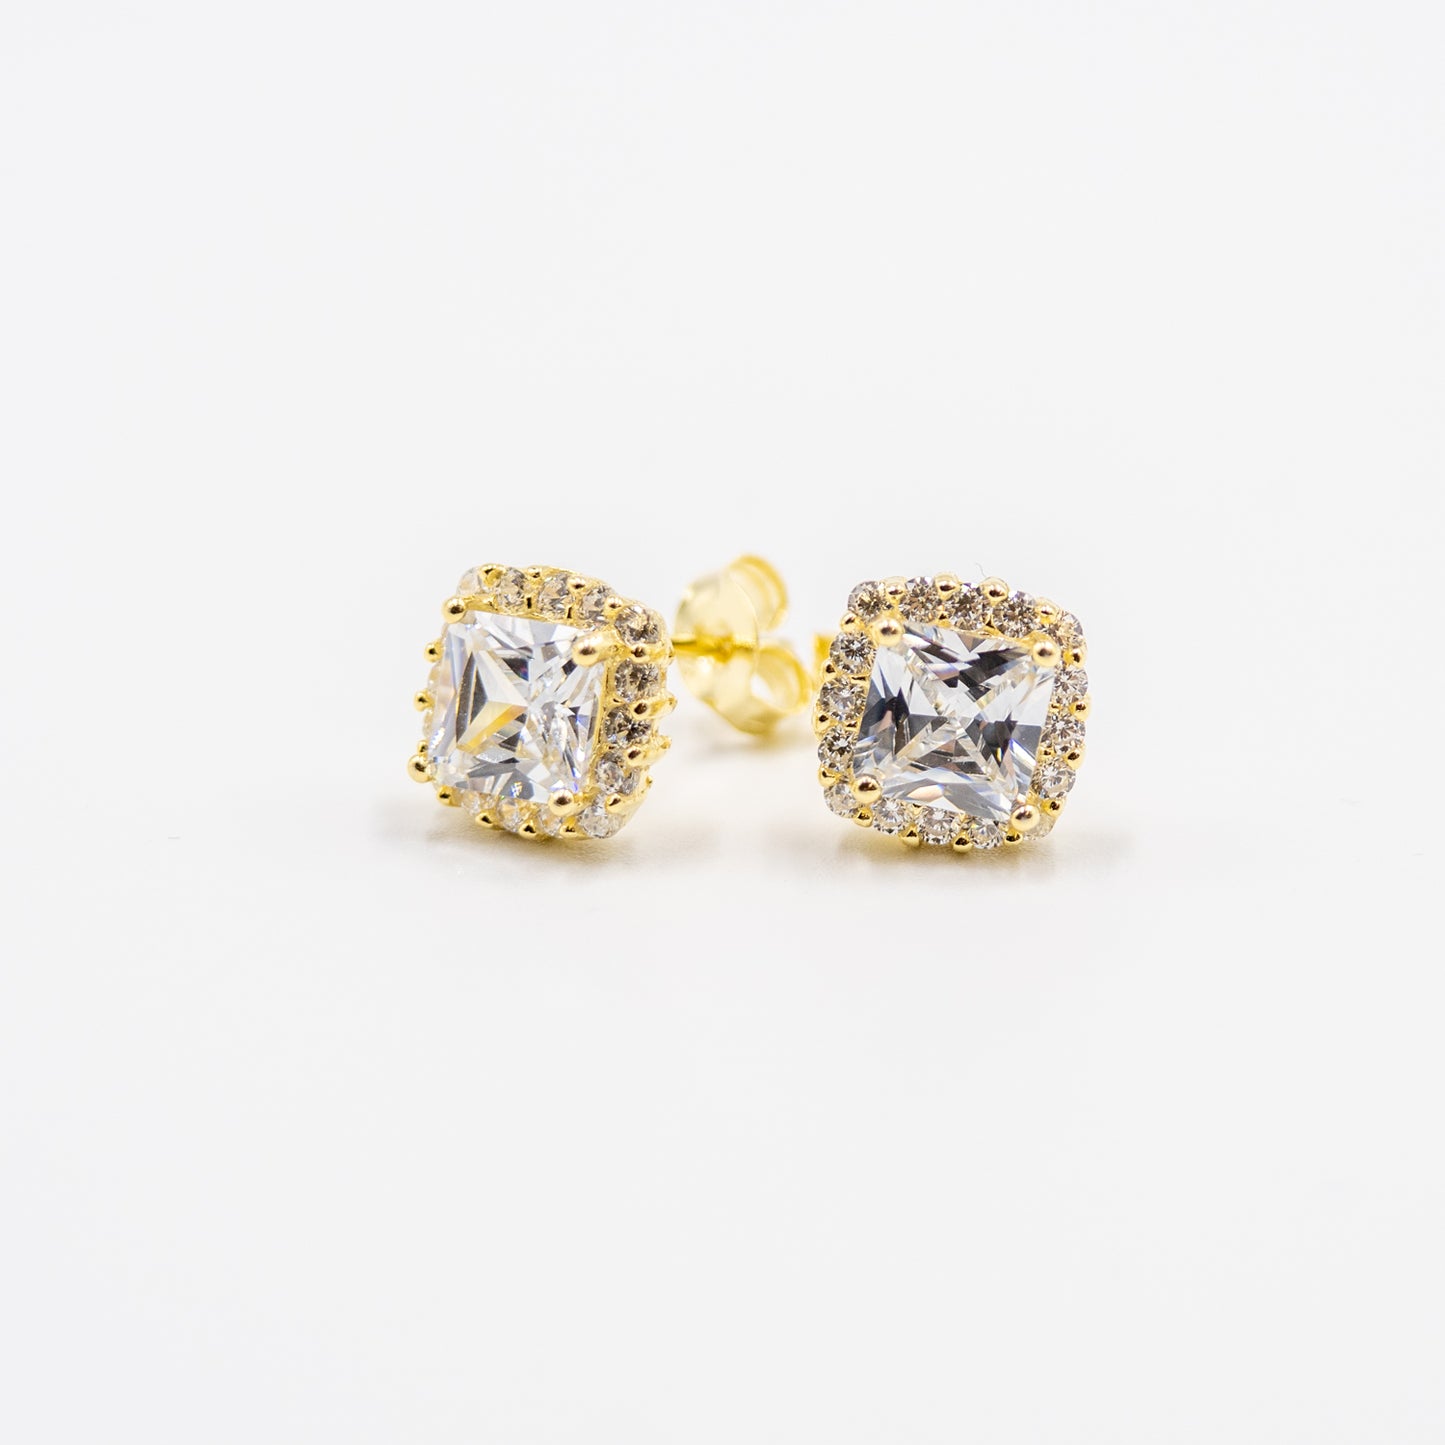 DK-925-188 sterling silver gold tone square earrings